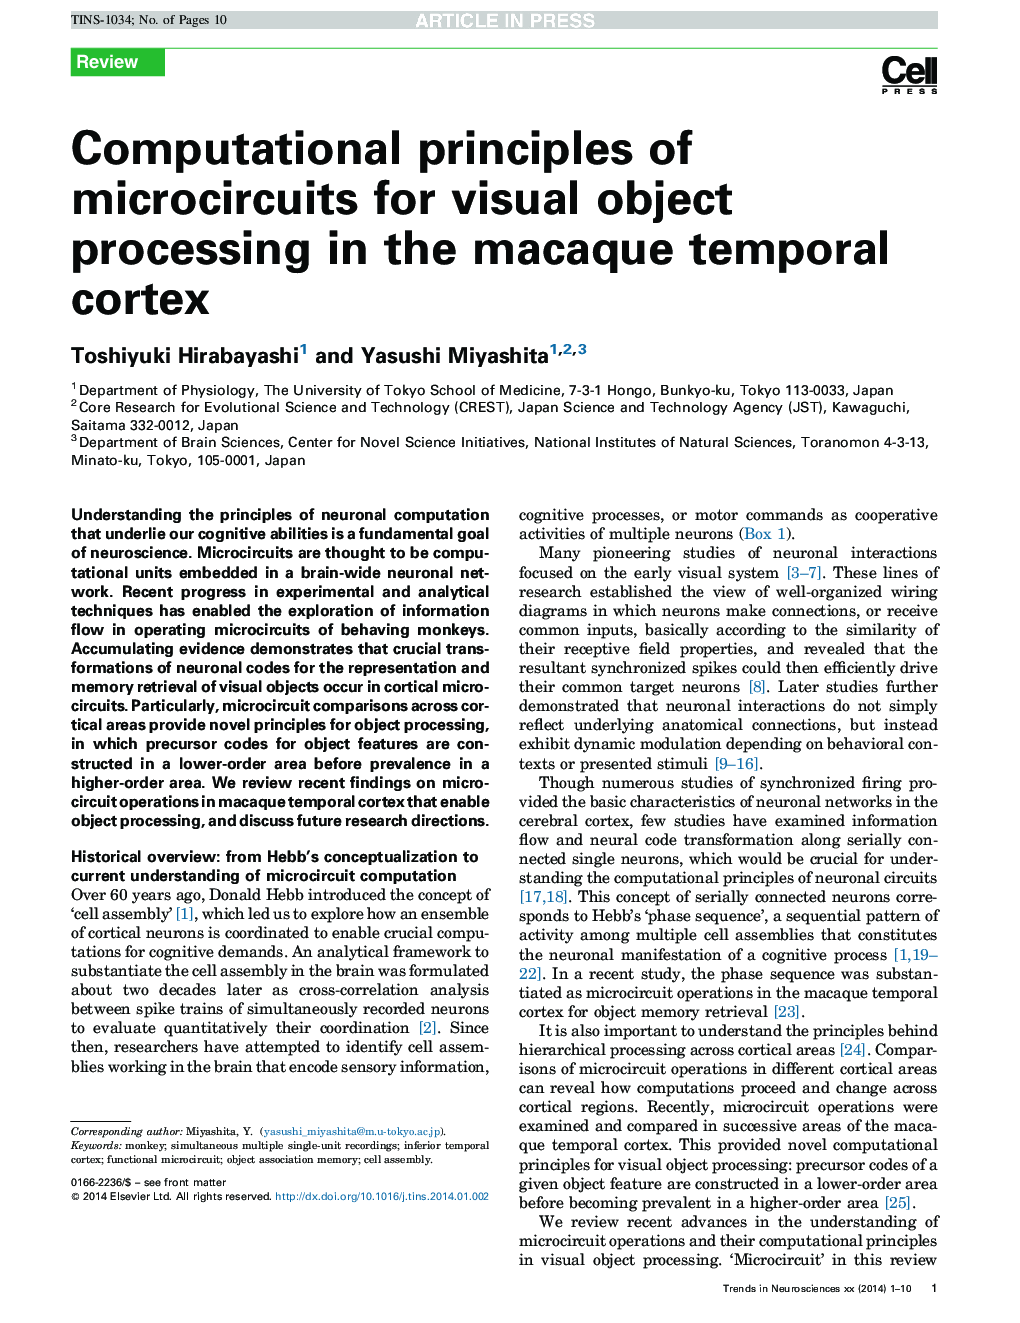 Computational principles of microcircuits for visual object processing in the macaque temporal cortex